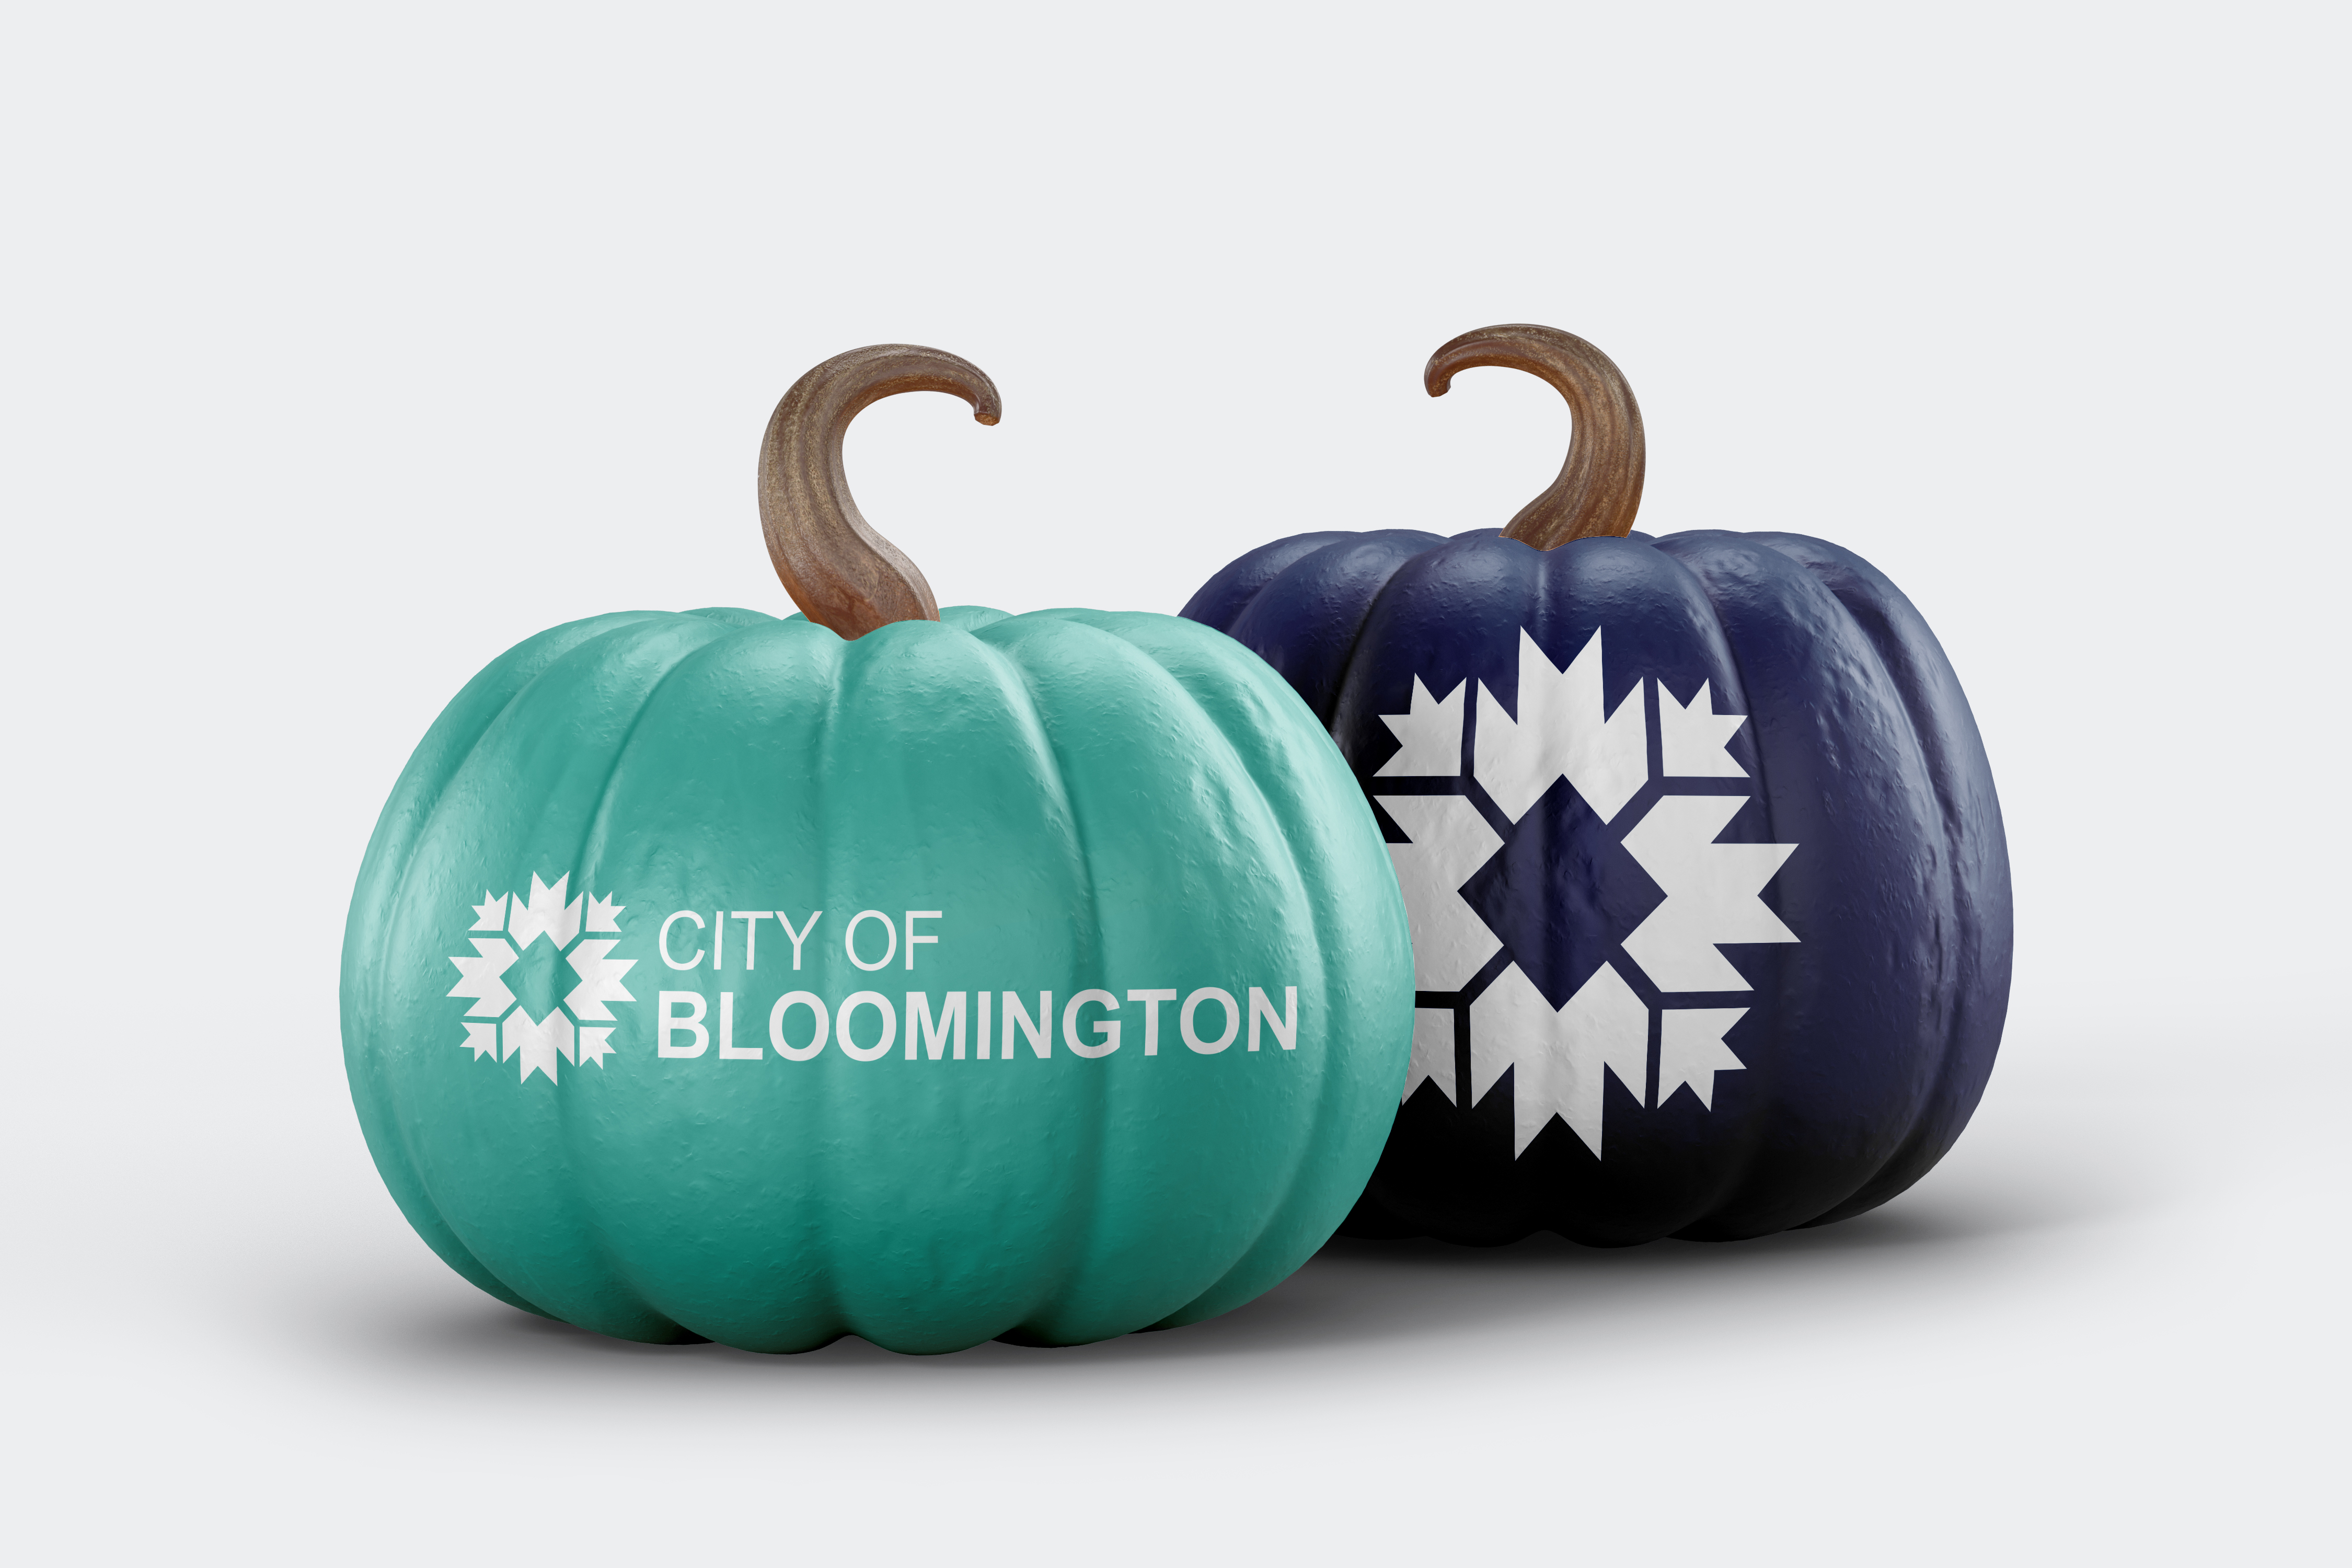 A teal pumpkin sitting next to a navy blue pumpkin on a light gray background. Both pumpkins showcase the city logo in whote.